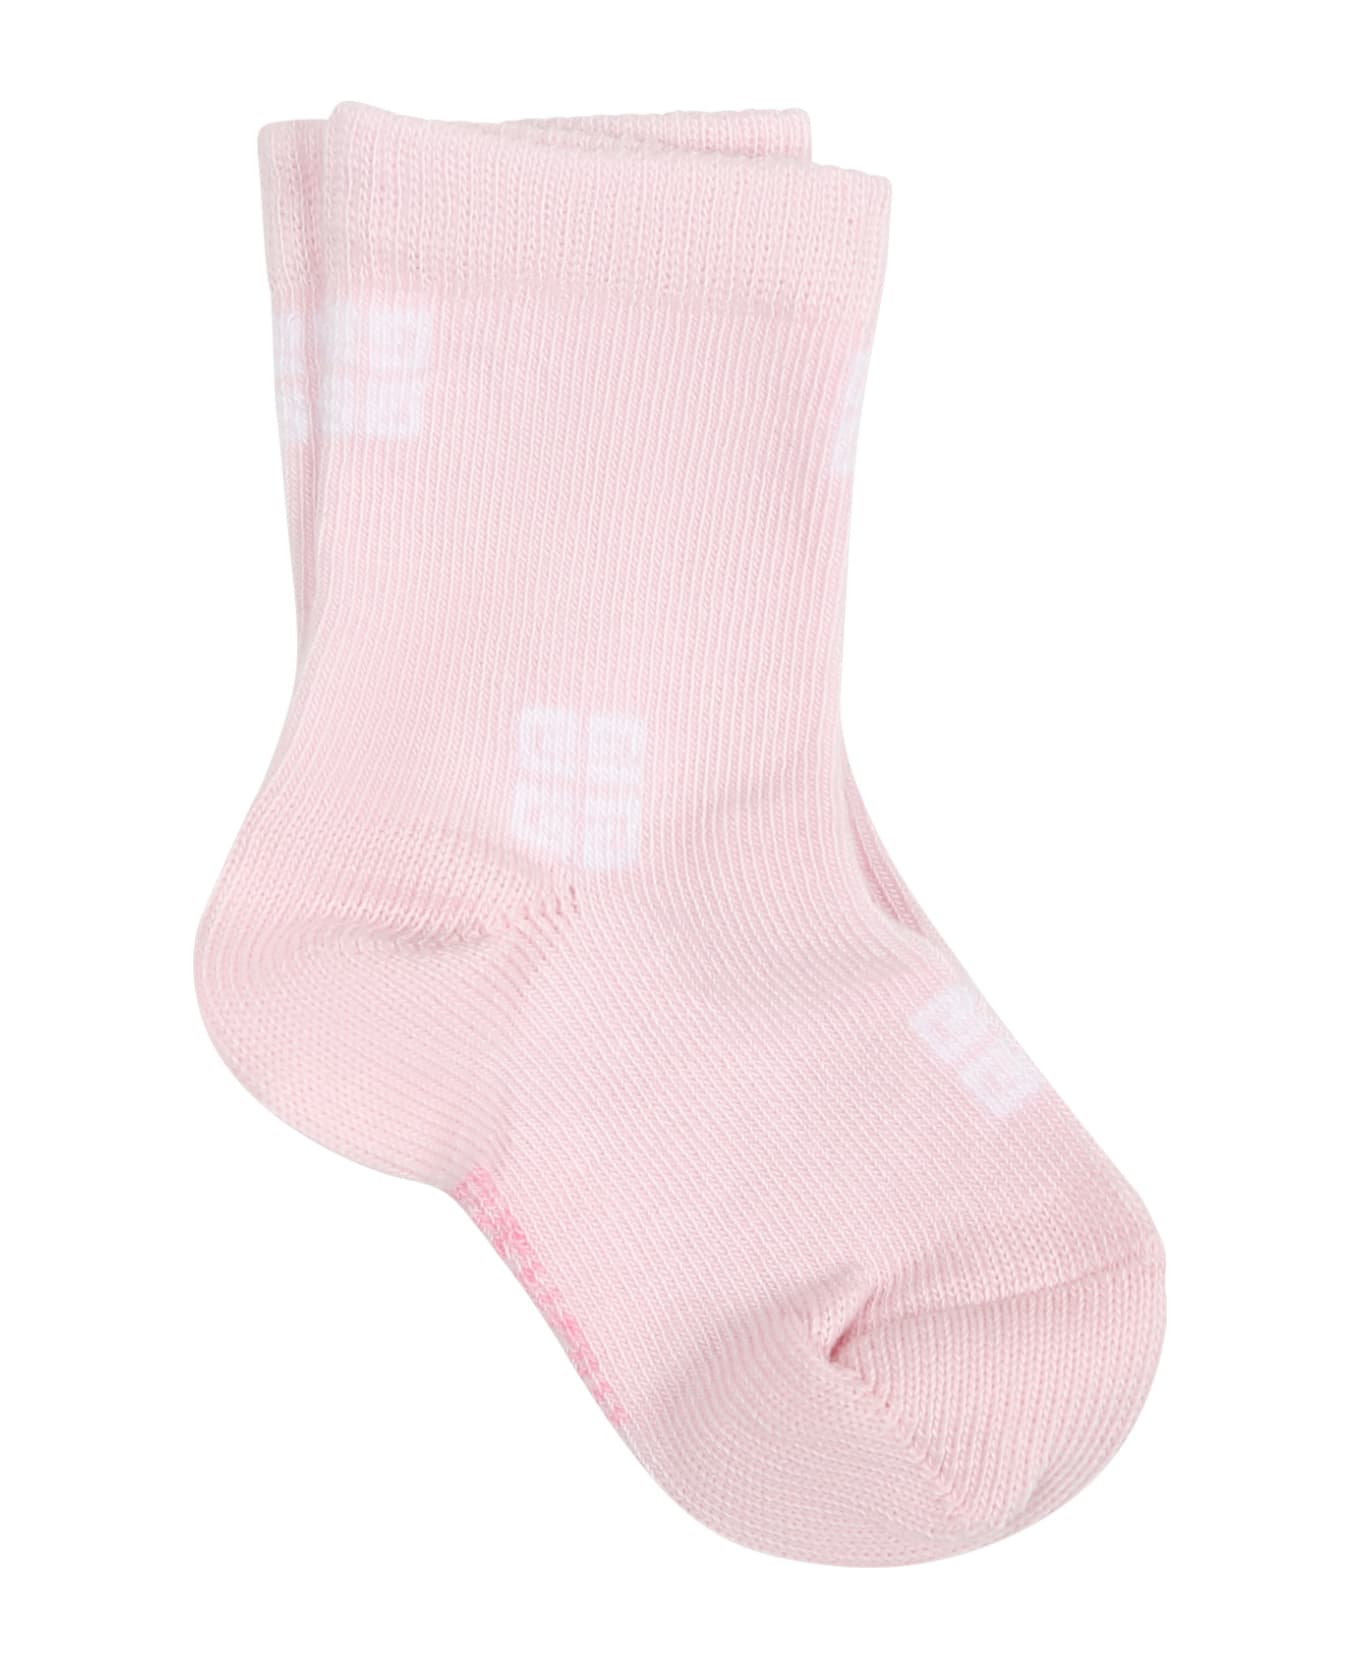 Givenchy Pink Socks Set For Baby Girl With Logo - Pink アンダーウェア